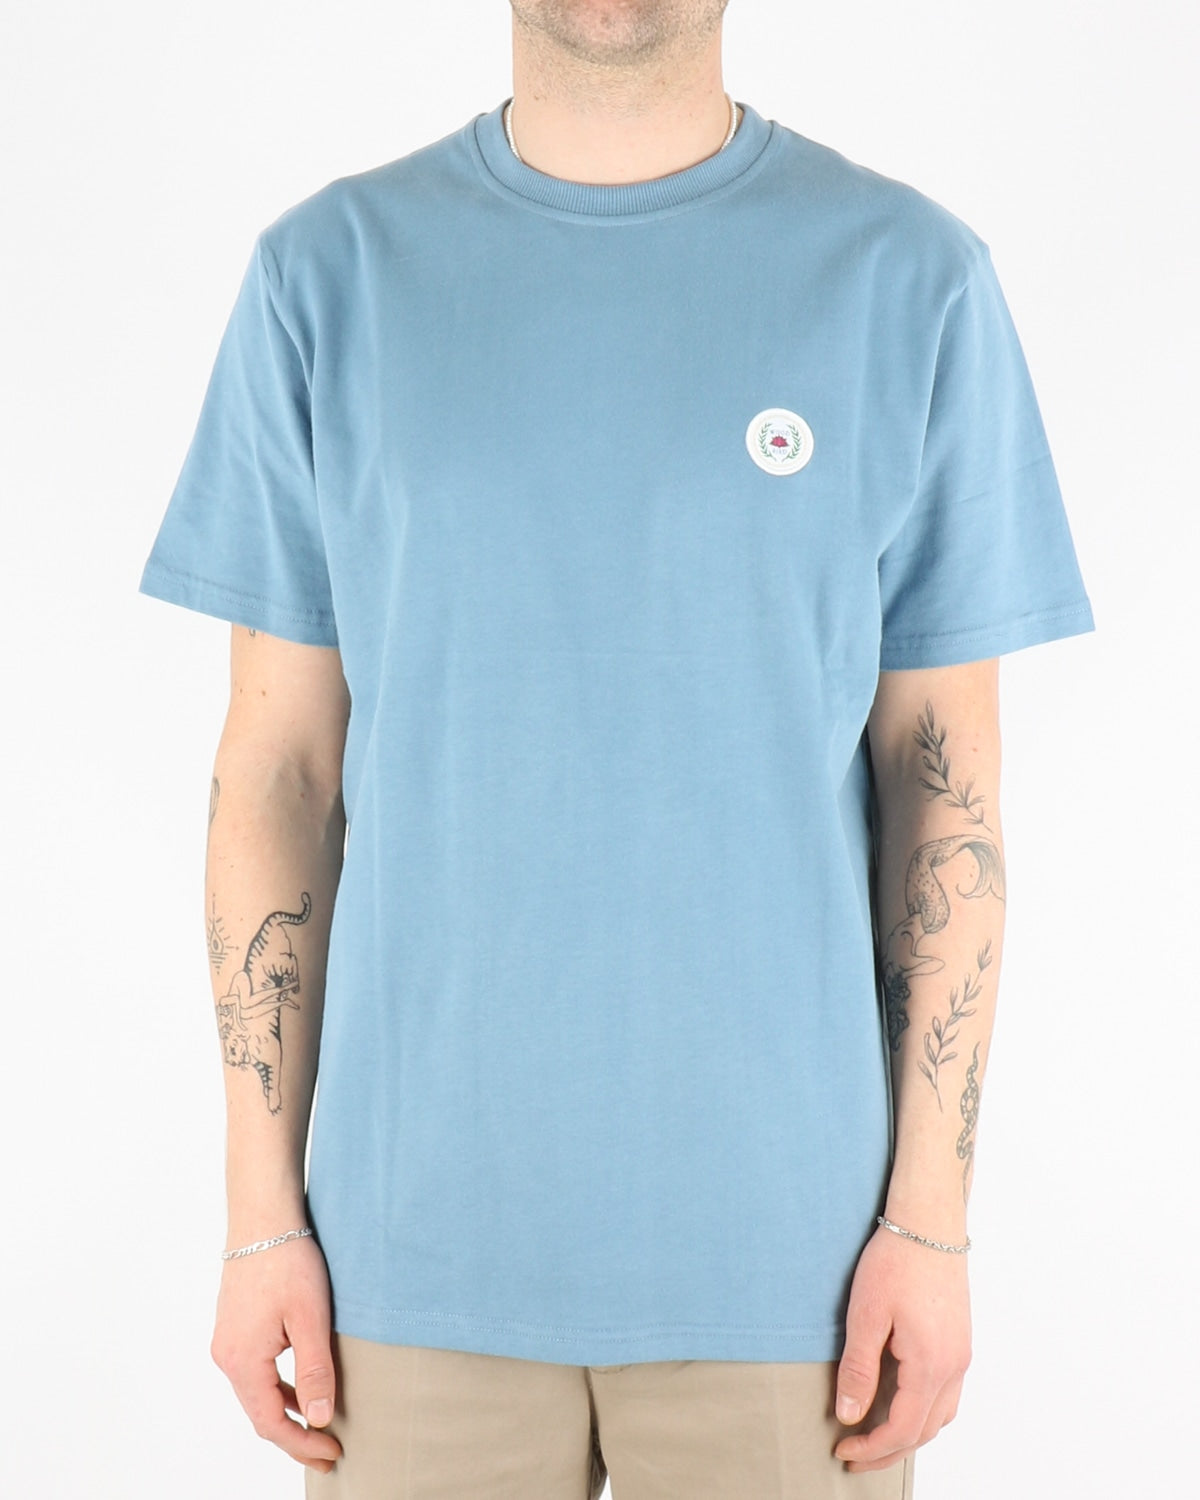 woodbird_our jarvis patch tee_dust blue_1_3